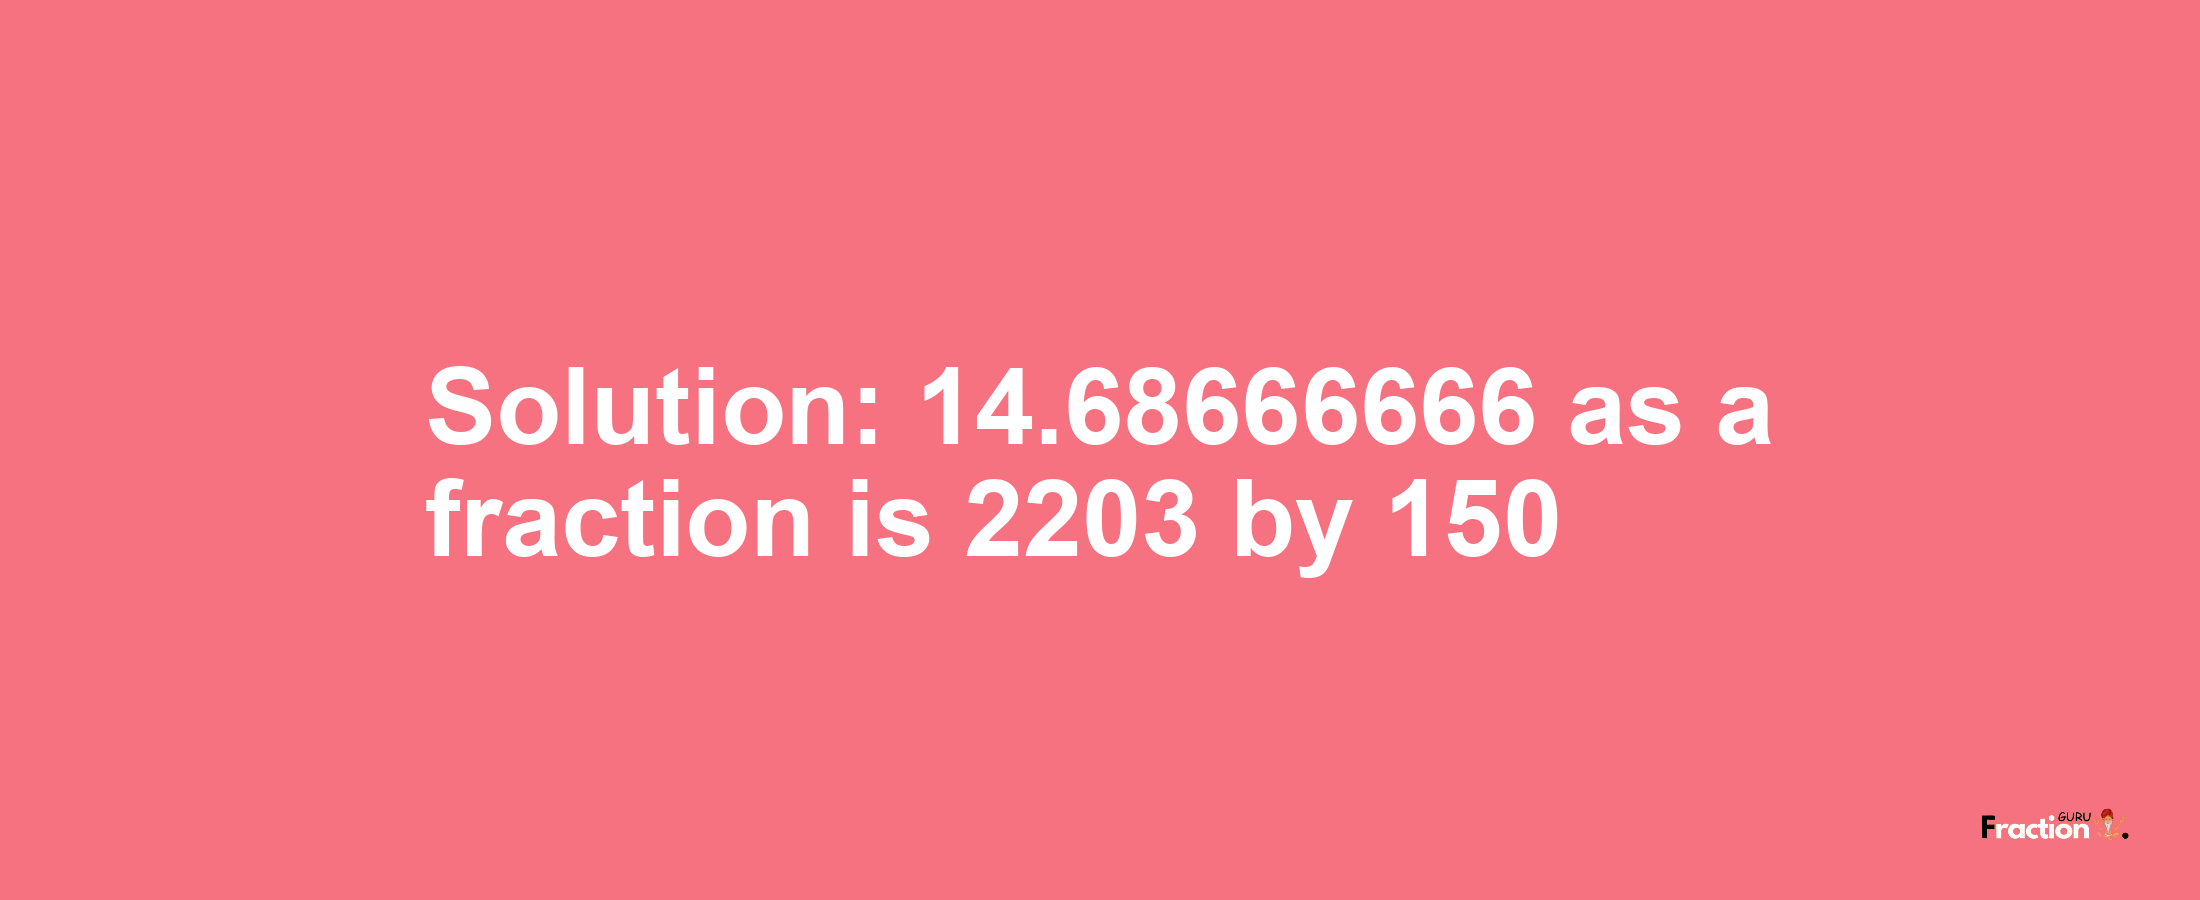 Solution:14.68666666 as a fraction is 2203/150